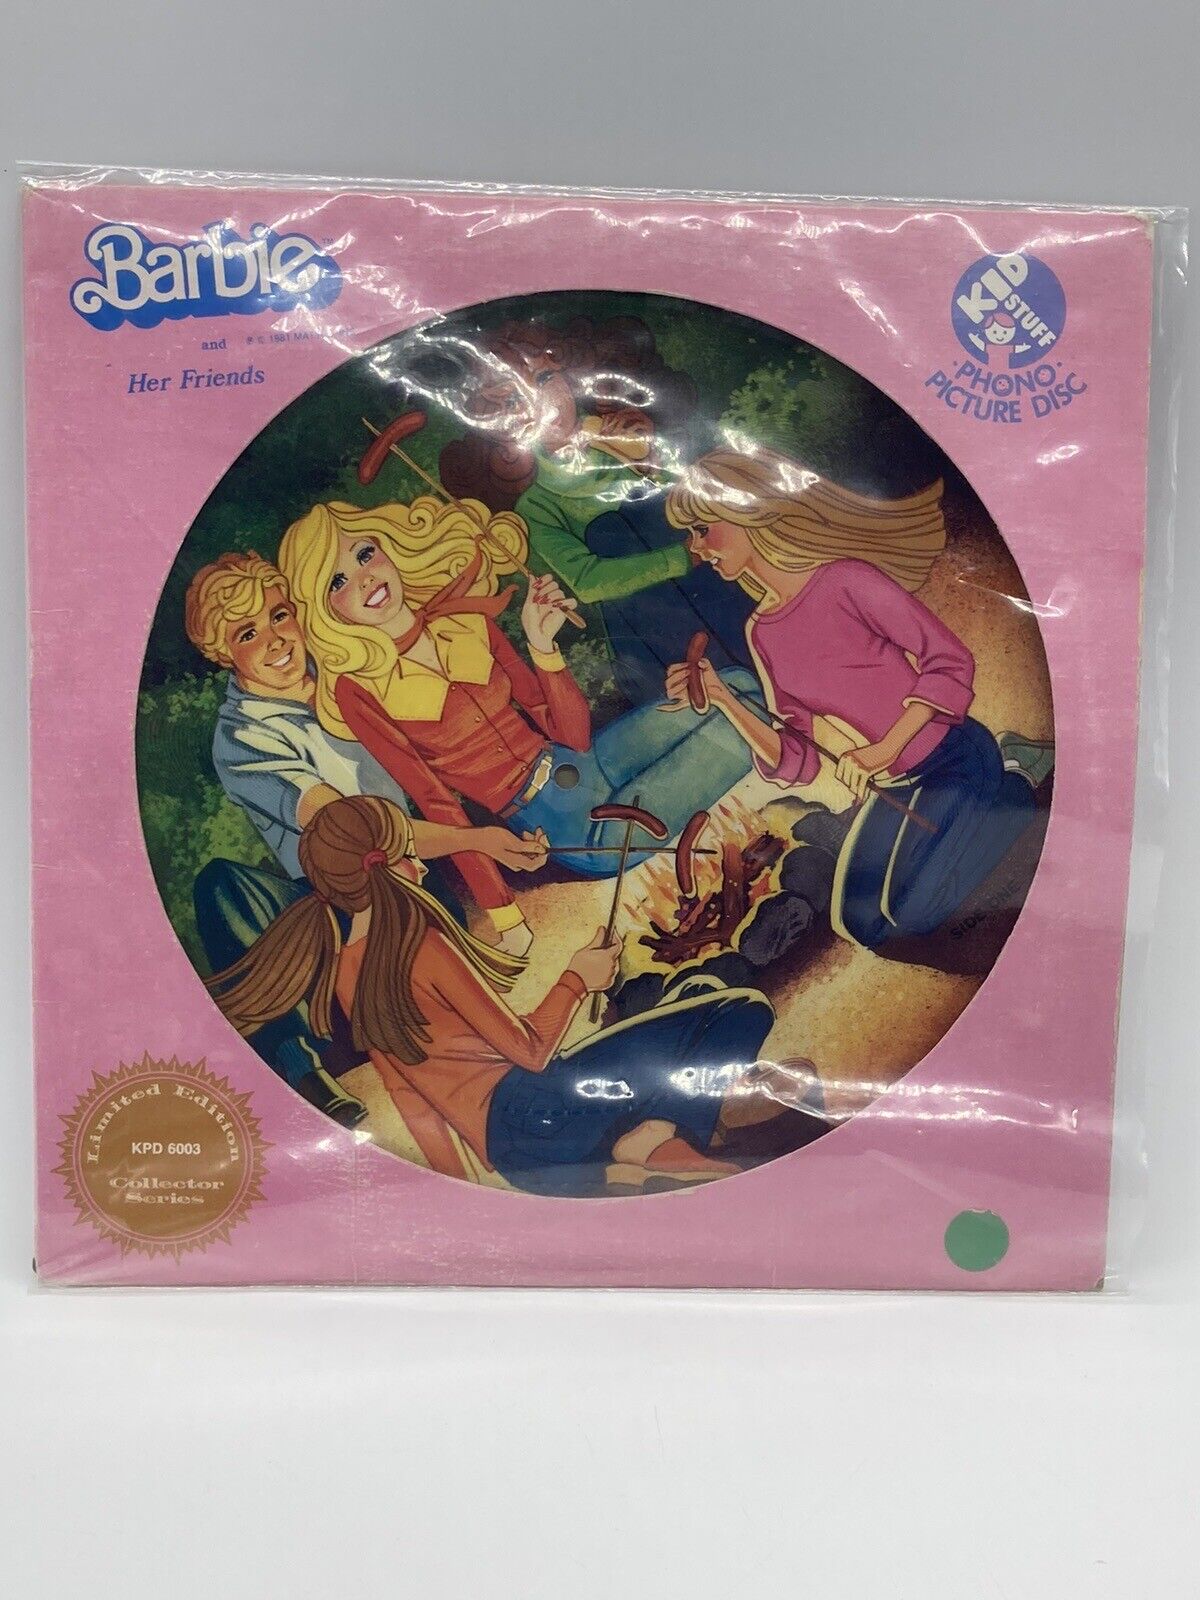 Vintage Barbie And Her Friends LP Album Picture Disc Limited Edition 1981